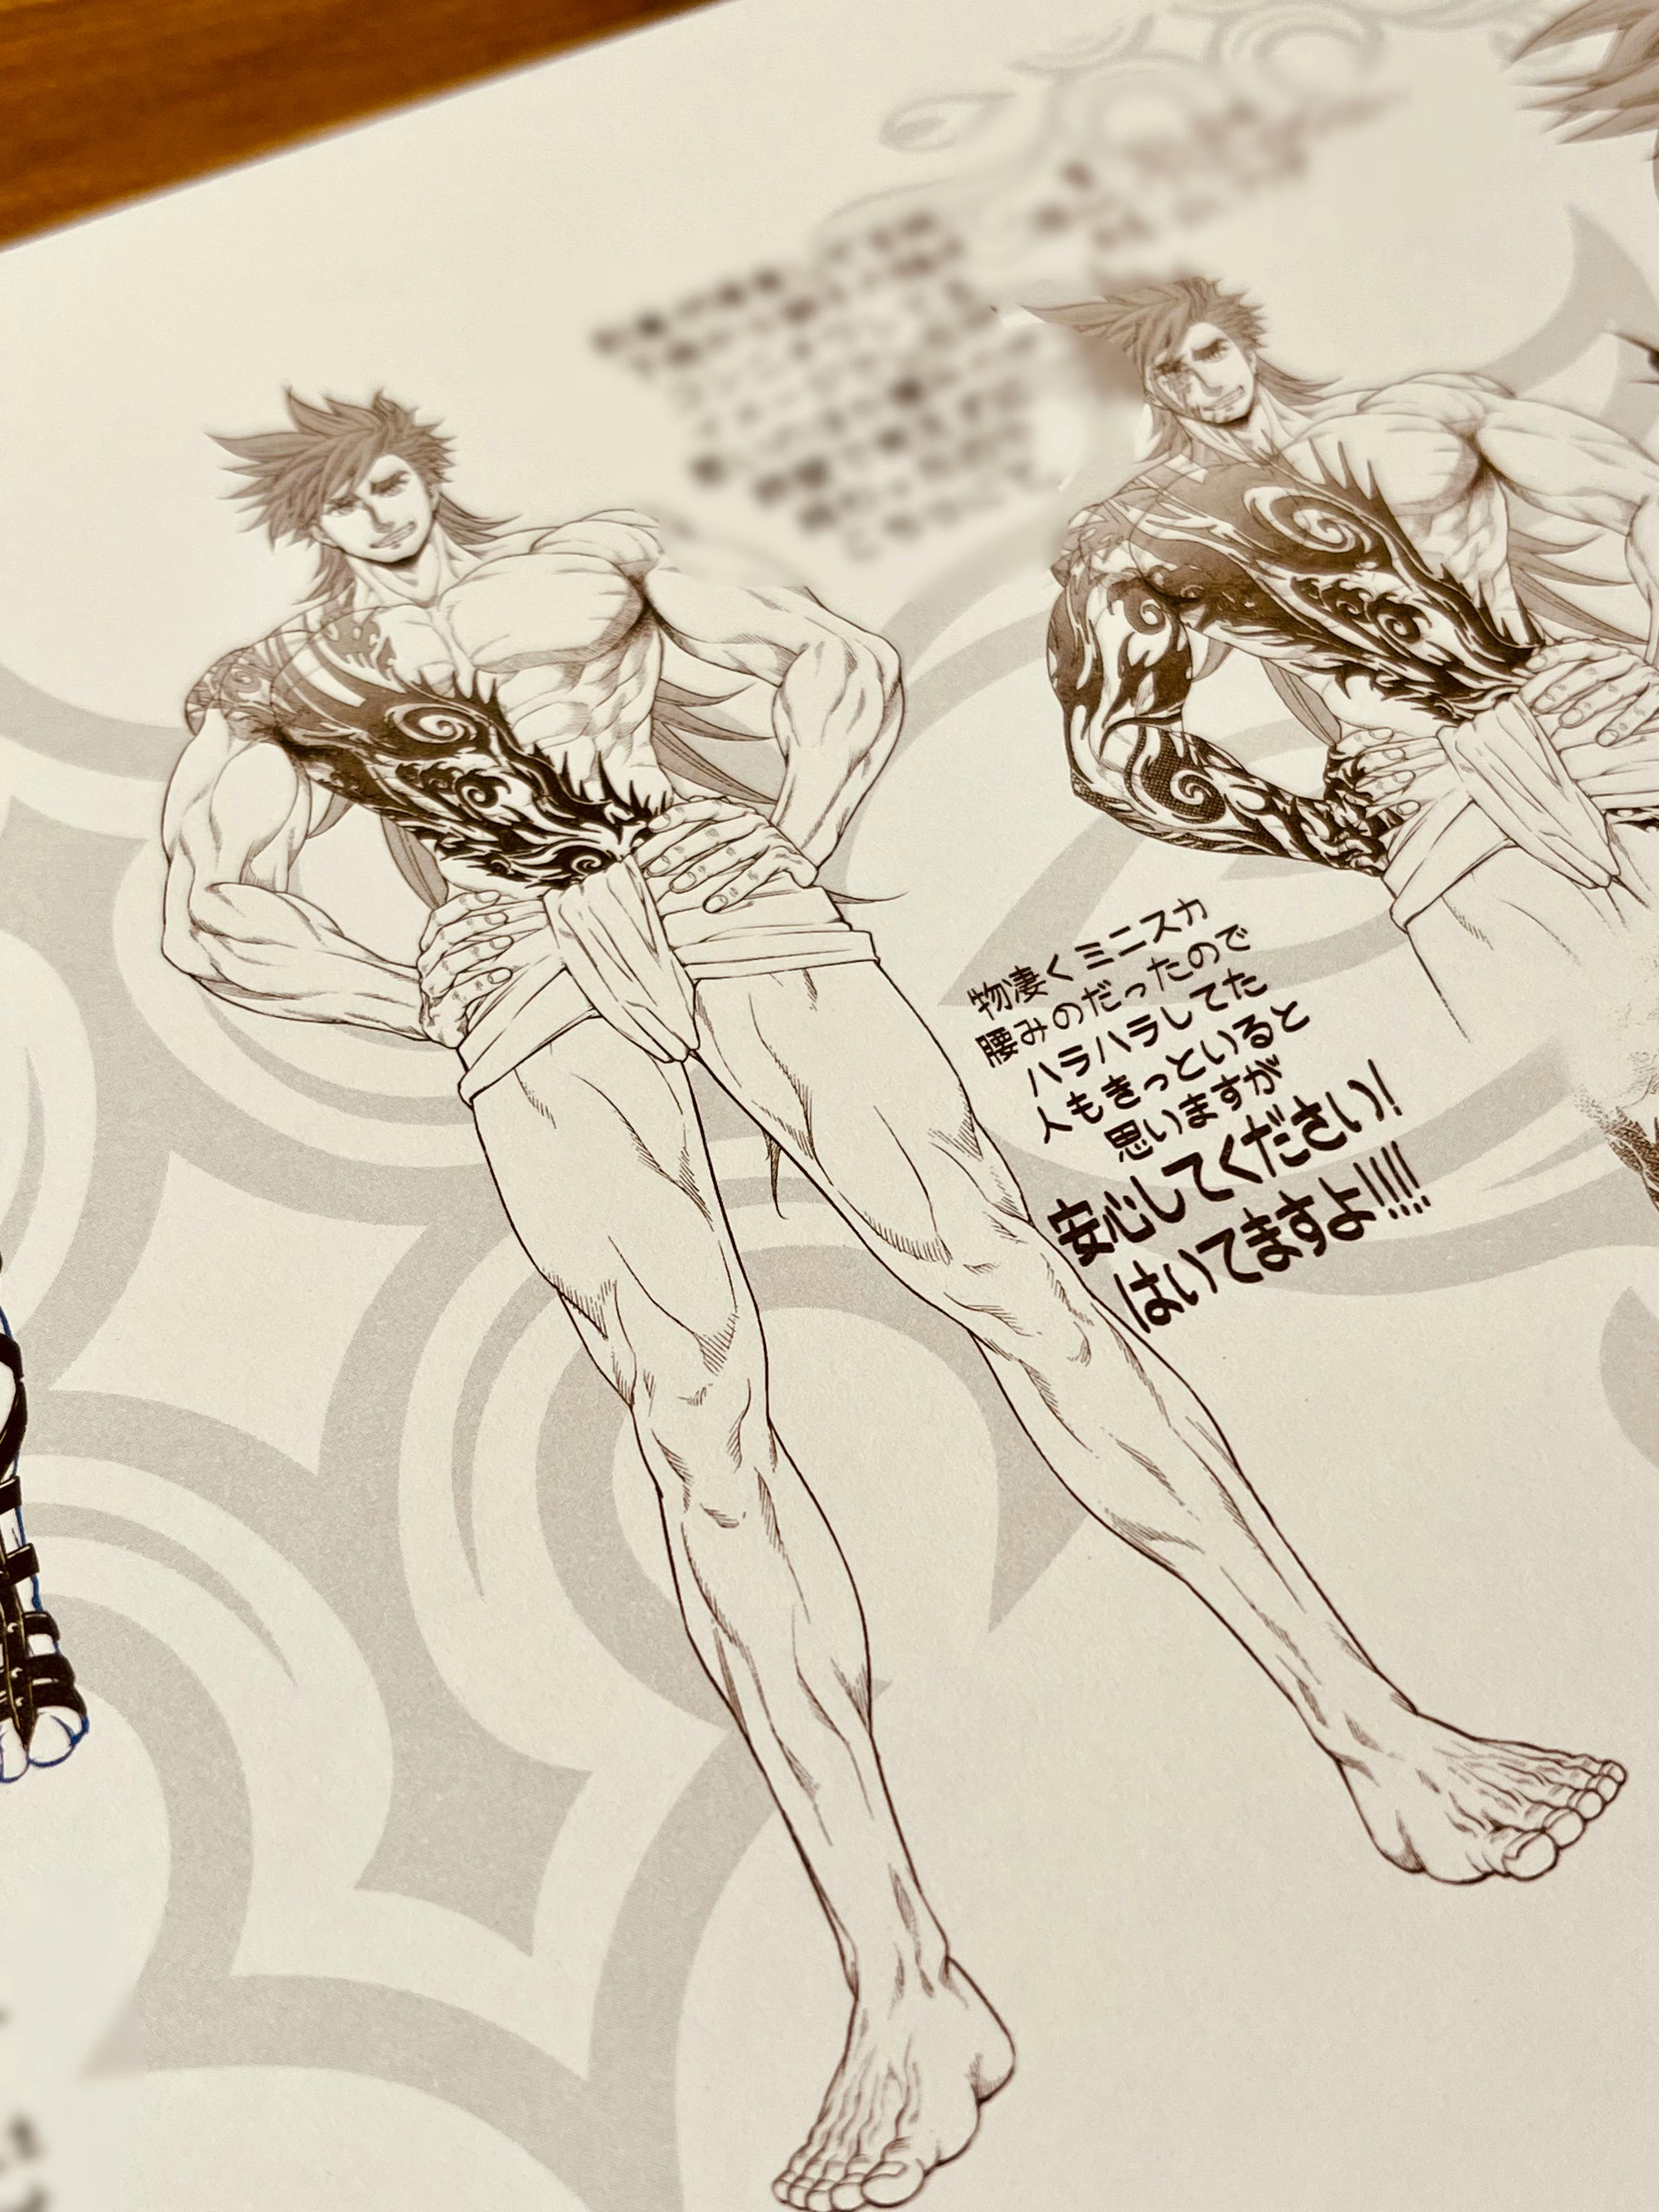 [Sneak peek part 5] 7/20 “Valkyrie of the End drawing setting material collection” now on sale! !